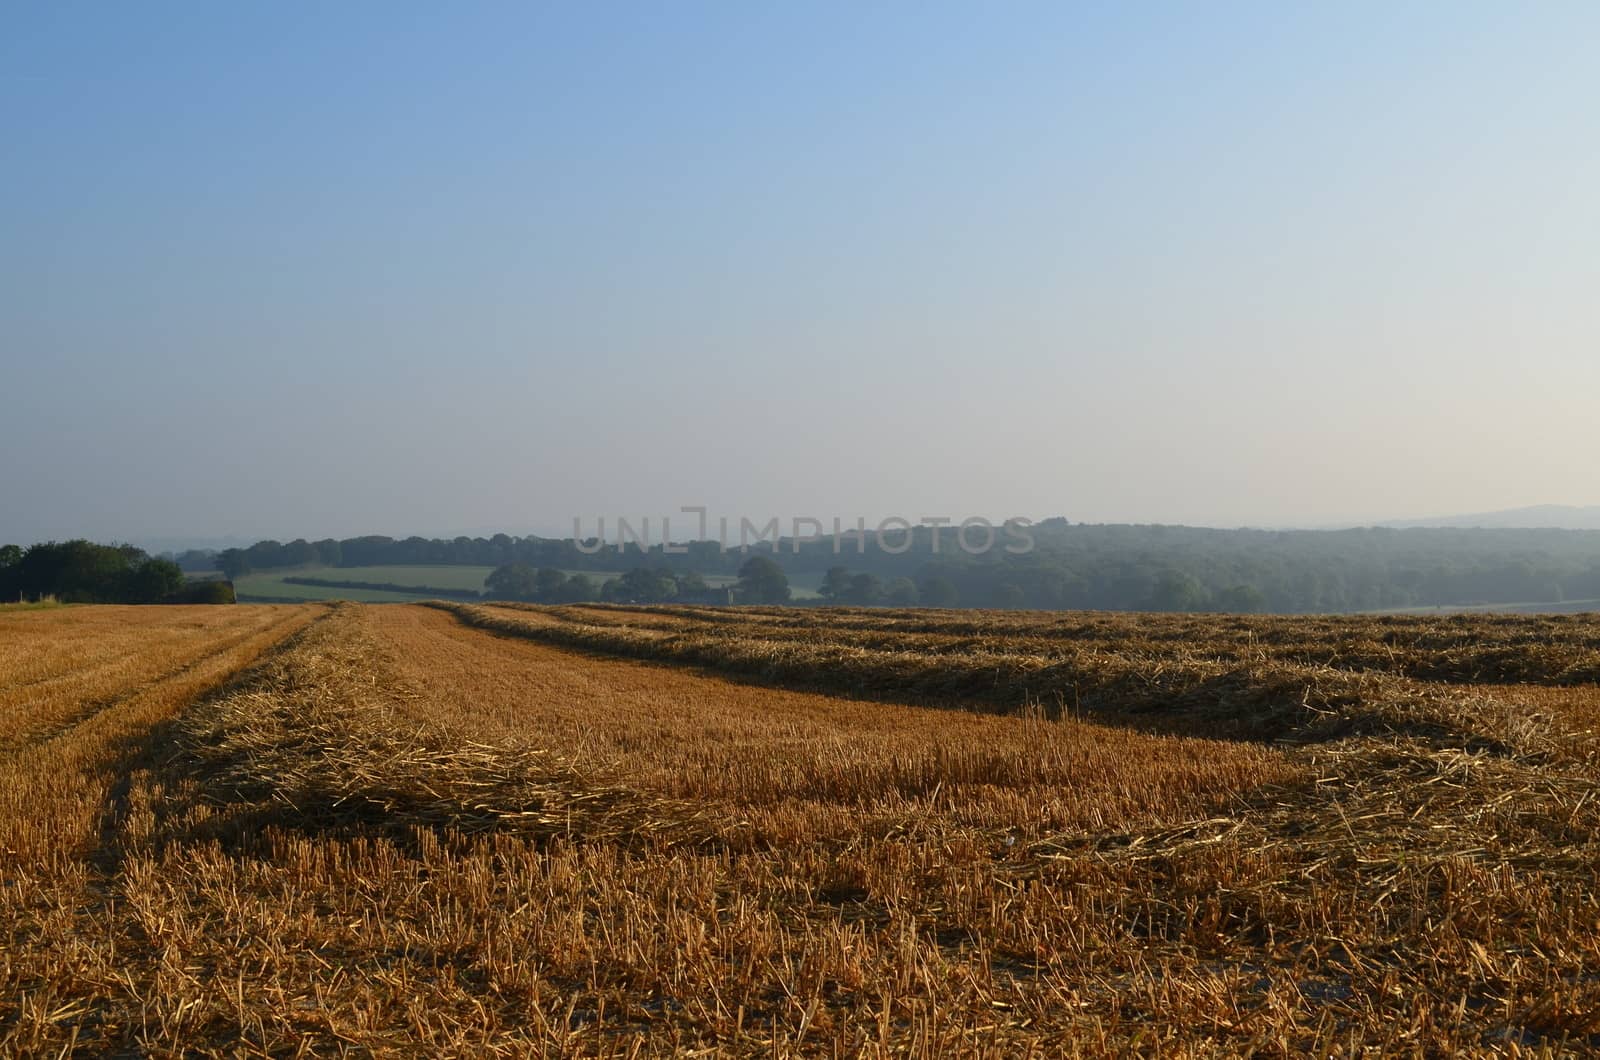 Cut hay waiting to be collected in a Sussex field in early September 2013.